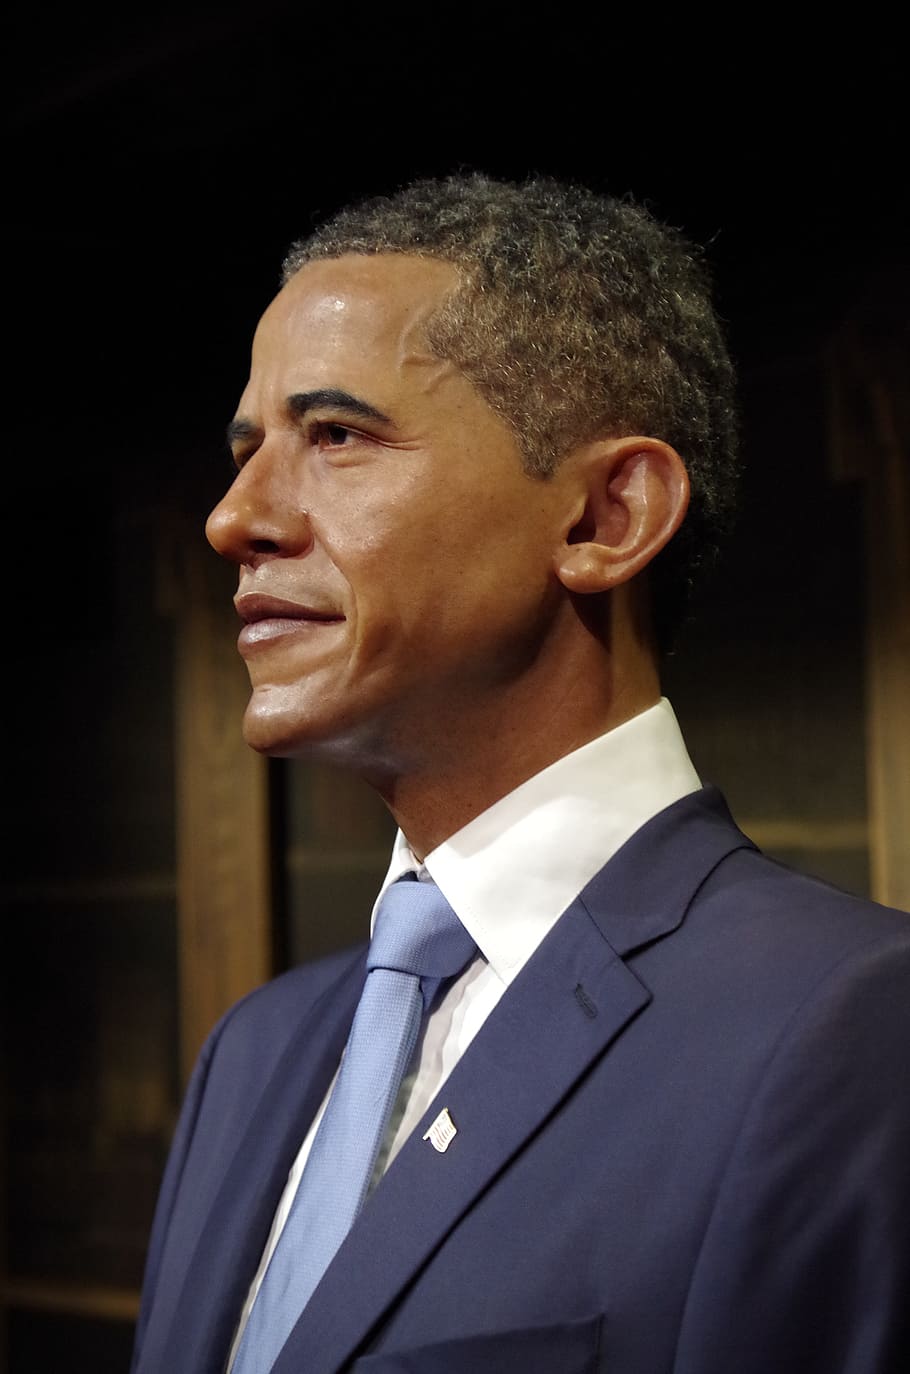 obama, the president of the, us, a wax dummy, headshot, one person, adult, portrait, well-dressed, men